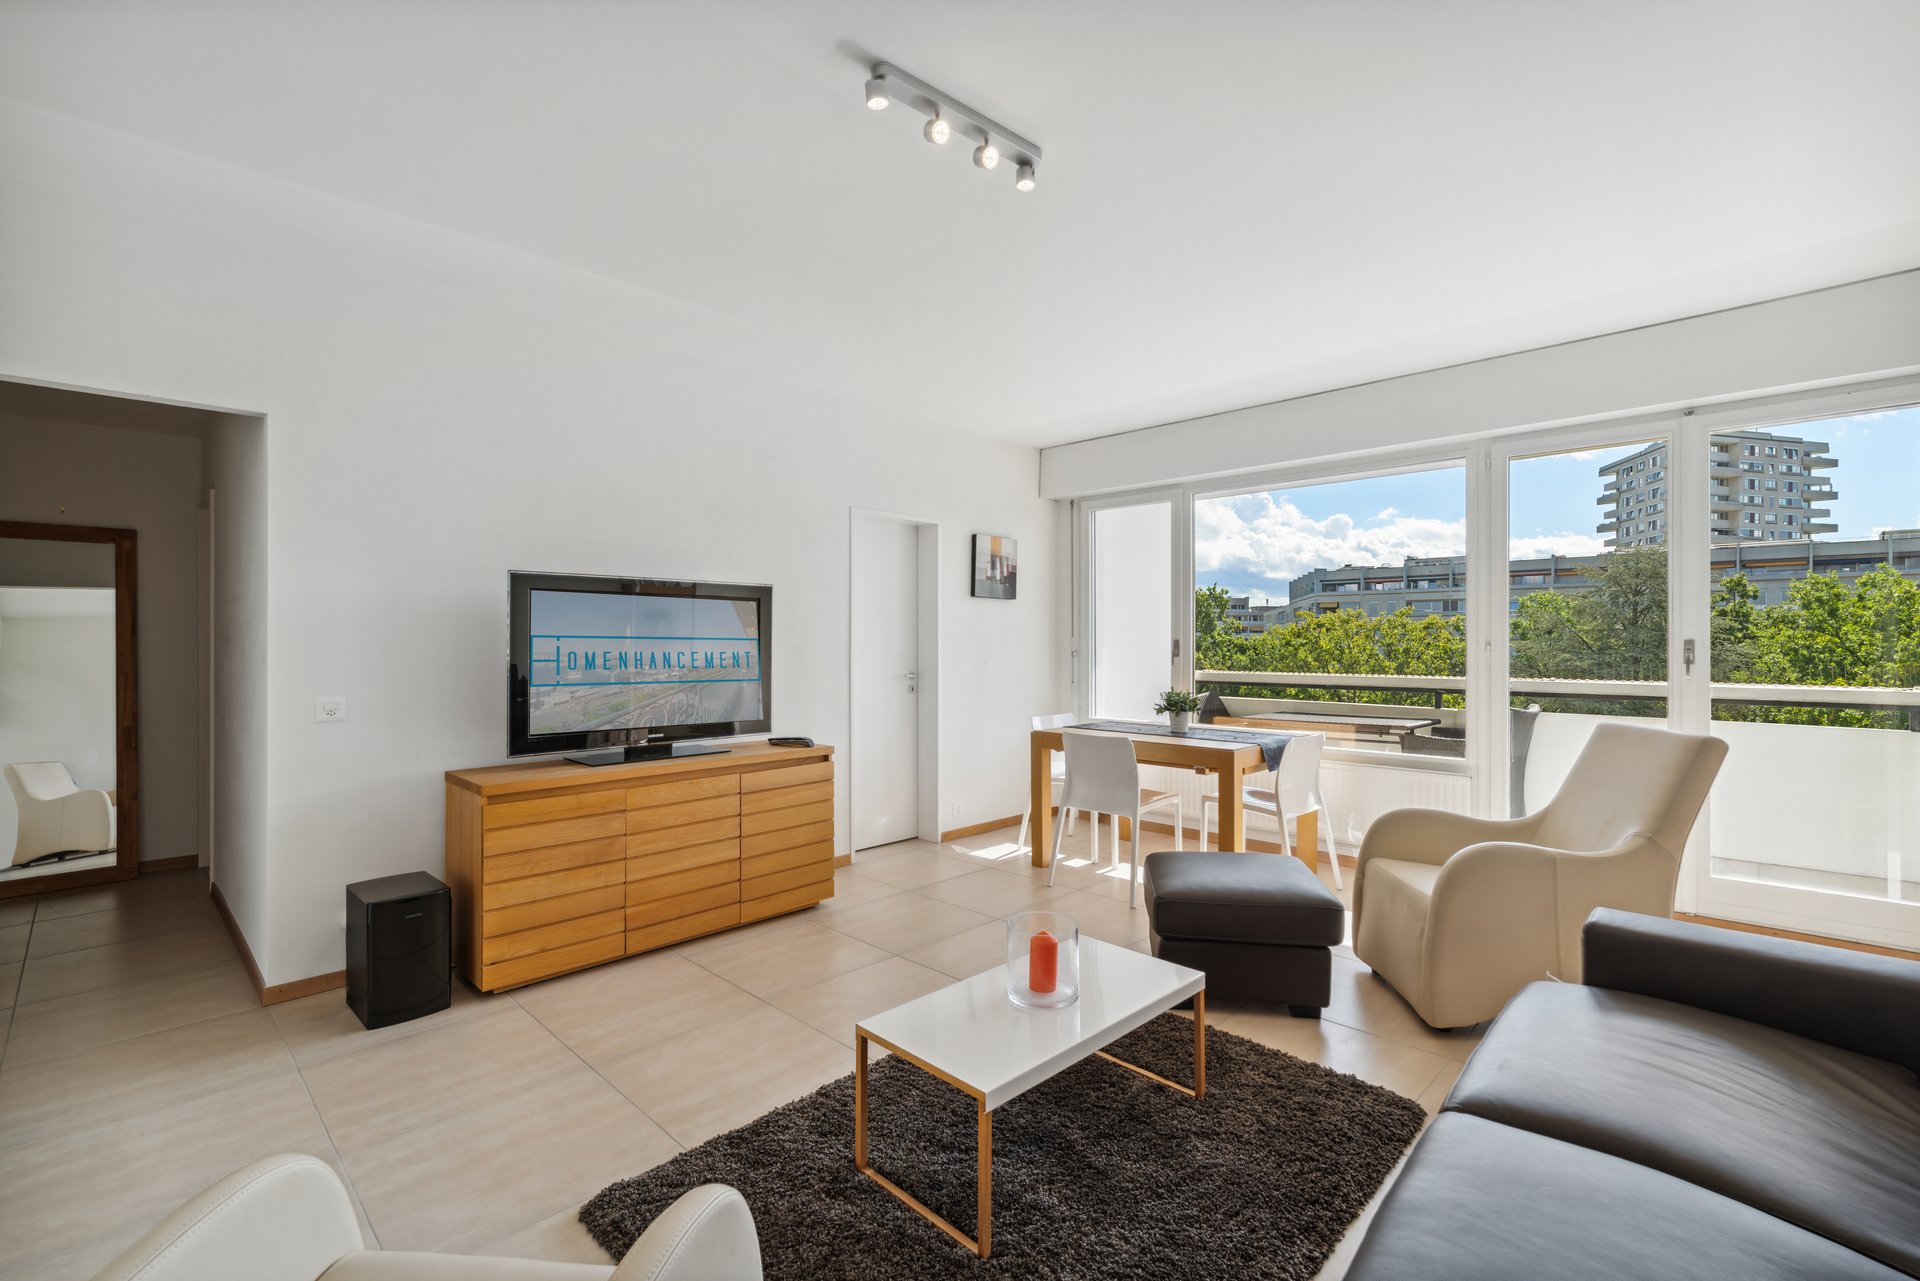 Furnished apartments for rent in Geneva